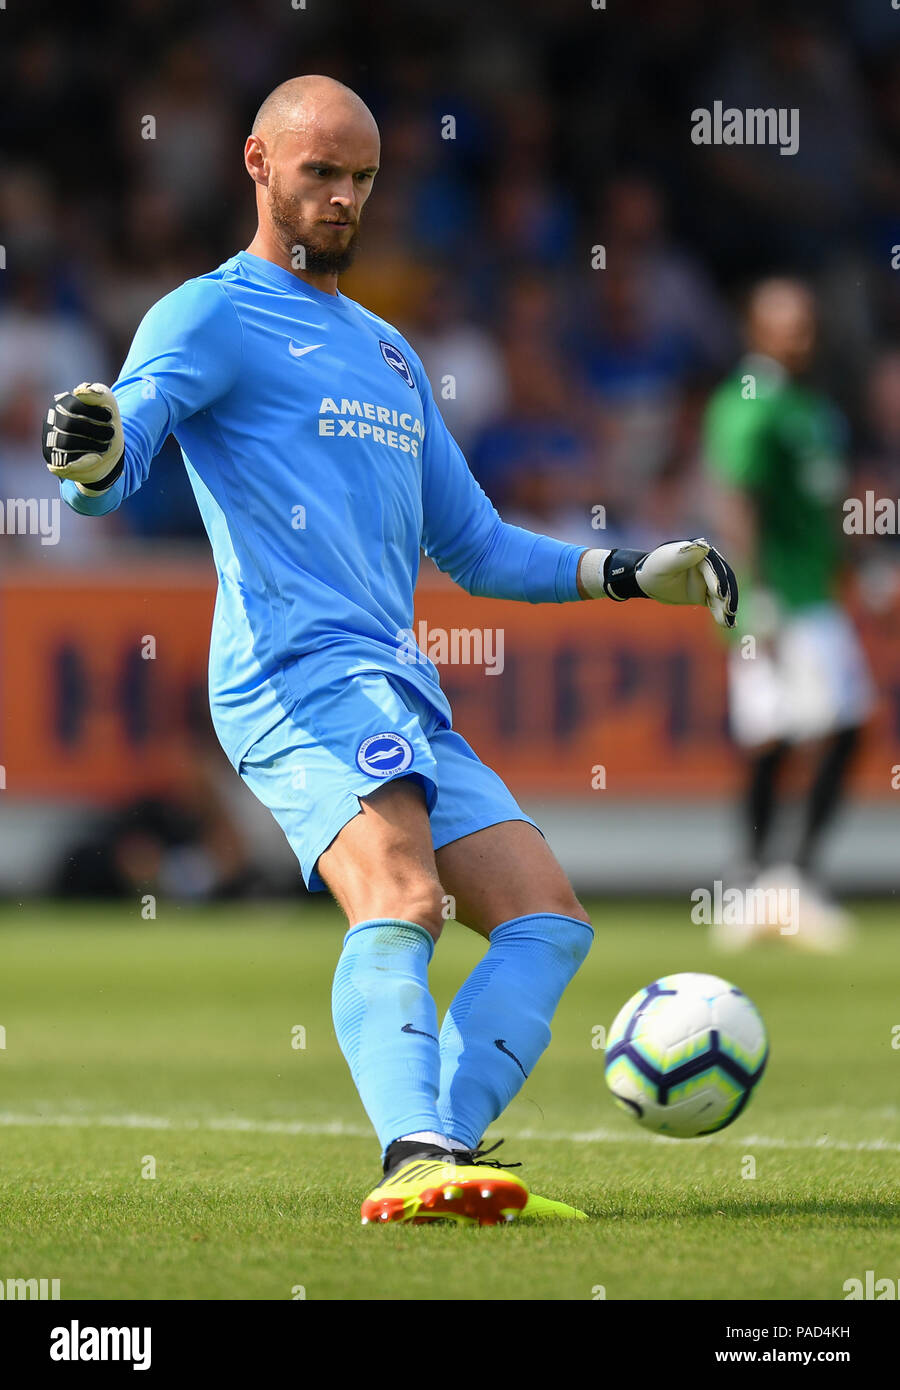 London, UK. 21st July, 2018: Brighton & Hove Albion's David Button in action during the Pre-Season Friendly against AFC Wimbledon at the Cherry Red Records Stadium, London, UK. Credit:Ashley Western/Alamy Live News Stock Photo